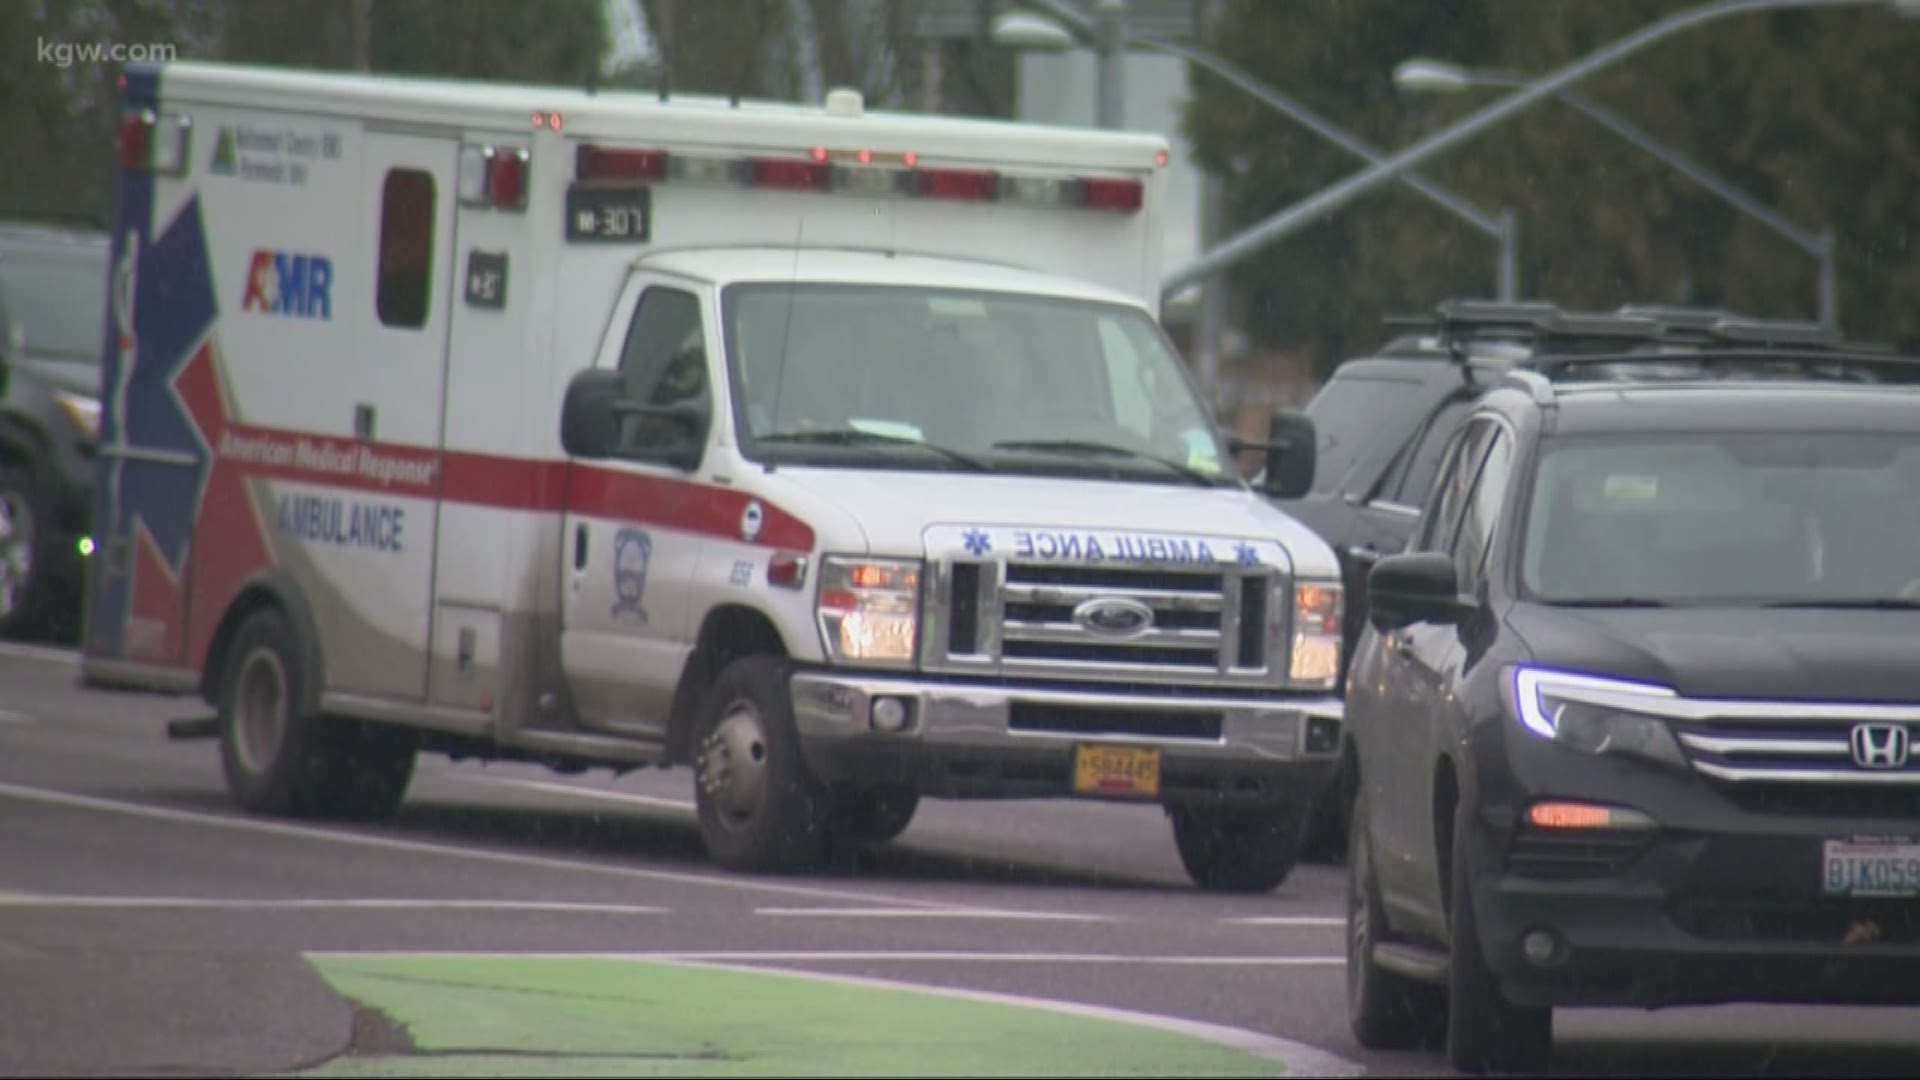 A paramedic was attacked on the job by a man trying to get into an ambulance, police said.